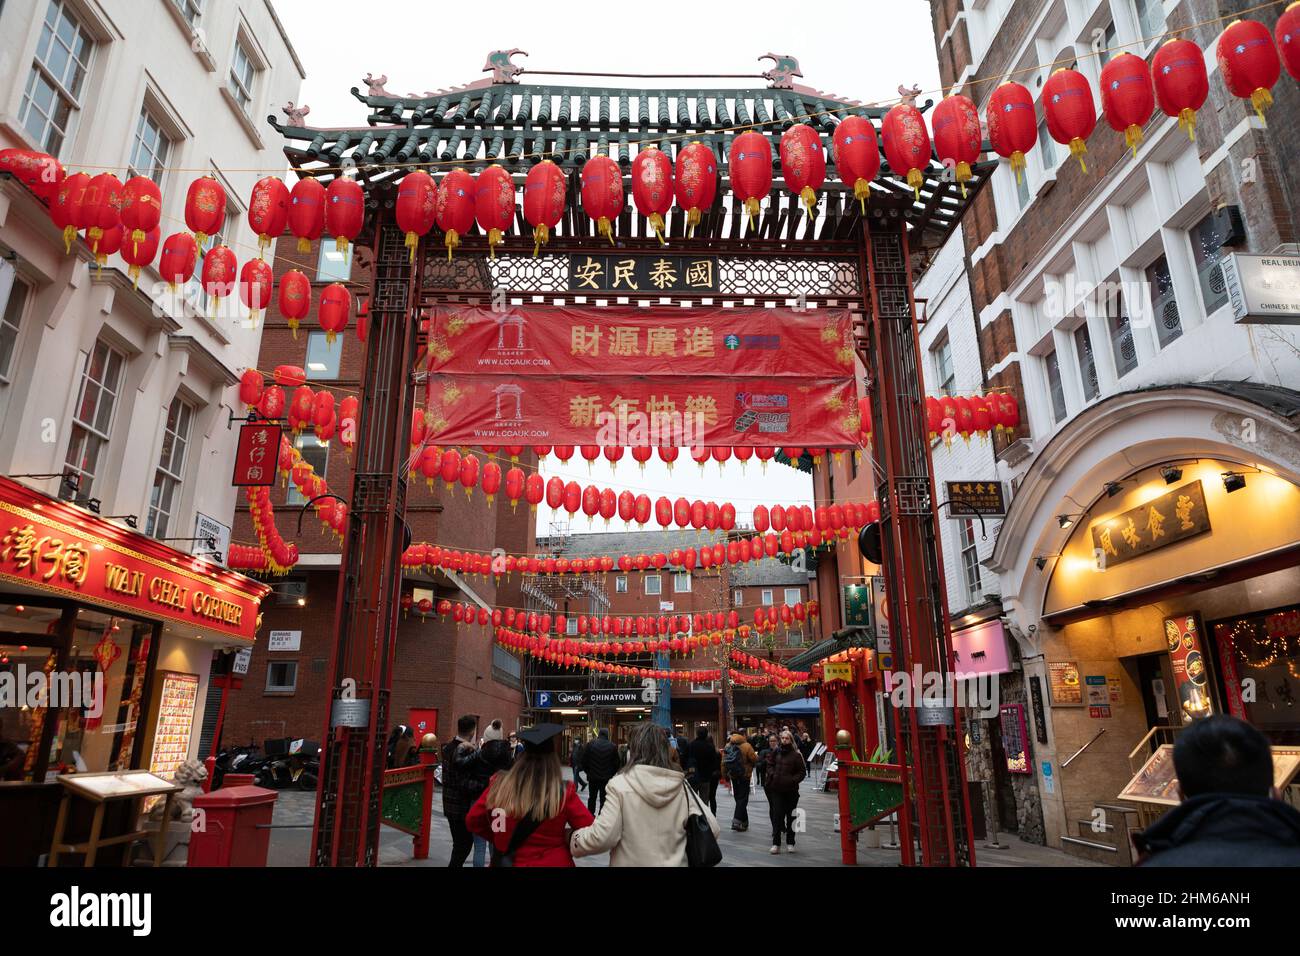 A general view of the plaque at Gerrard Street at China Town, London during the Chinese New Year. Stock Photo